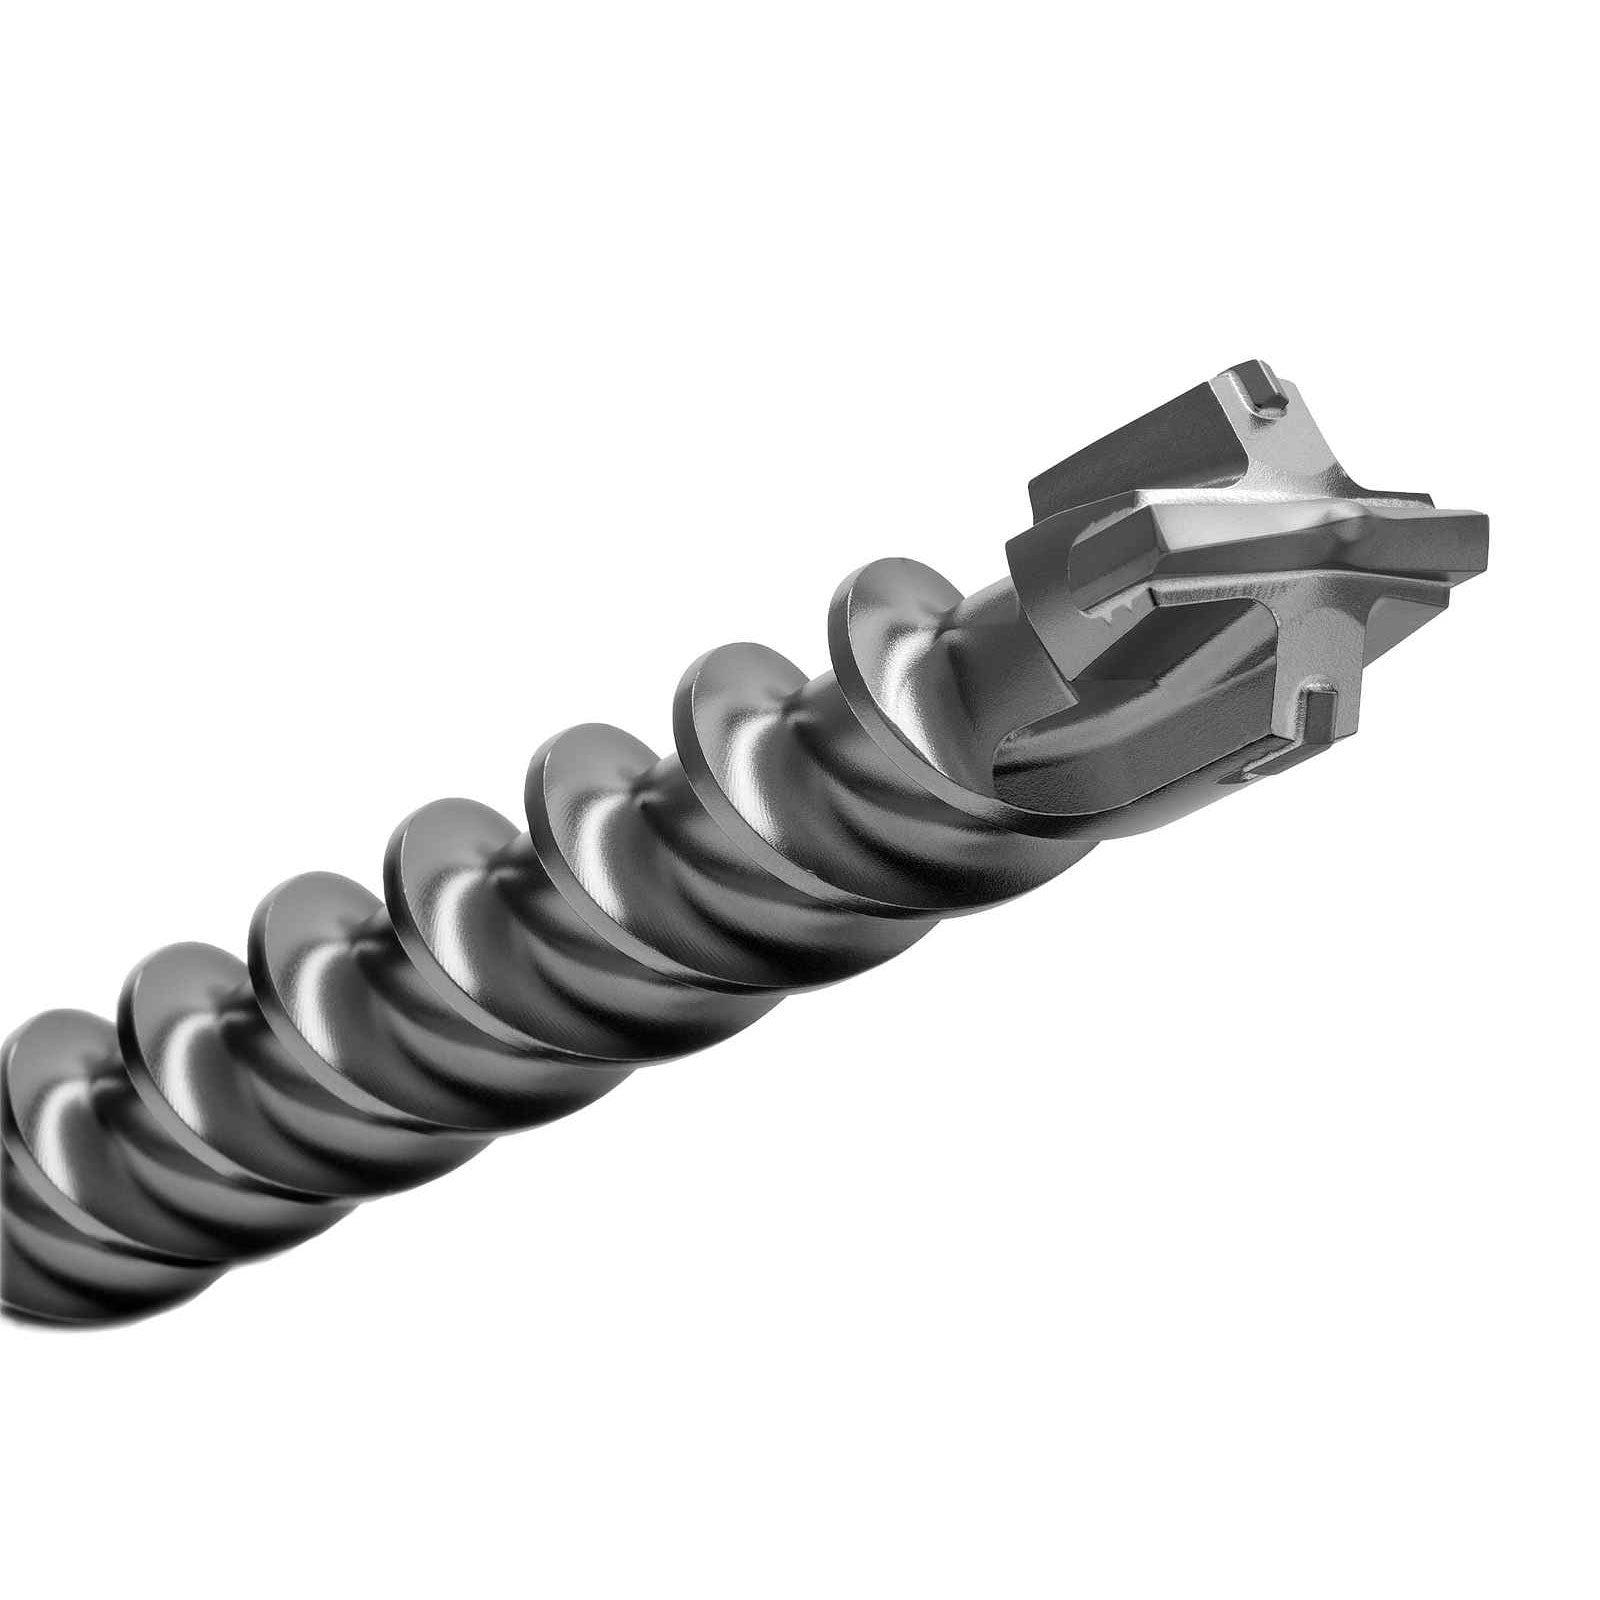 Difference between SDS, SDS Plus and SDS Max drills? – Bridge Fasteners